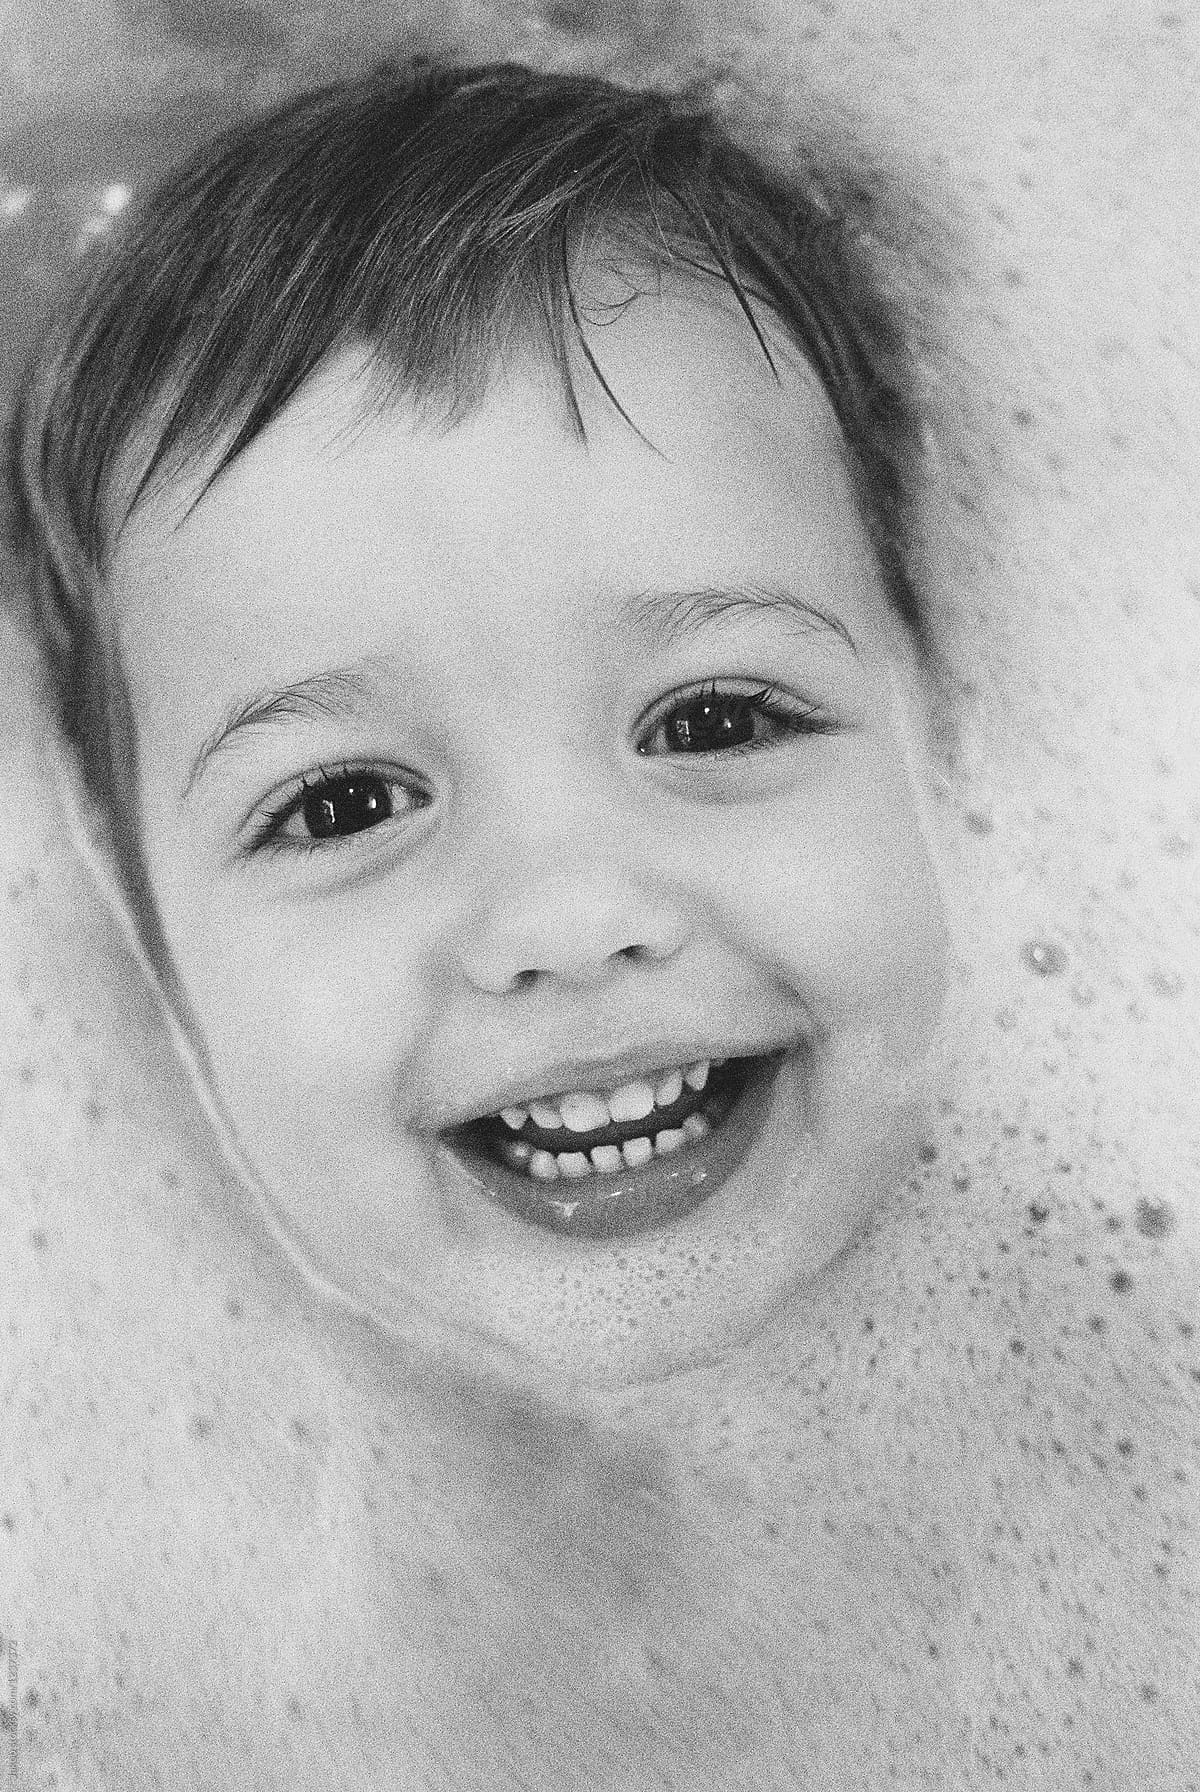 Cute smiling boy in bathtub with his face almost submerged